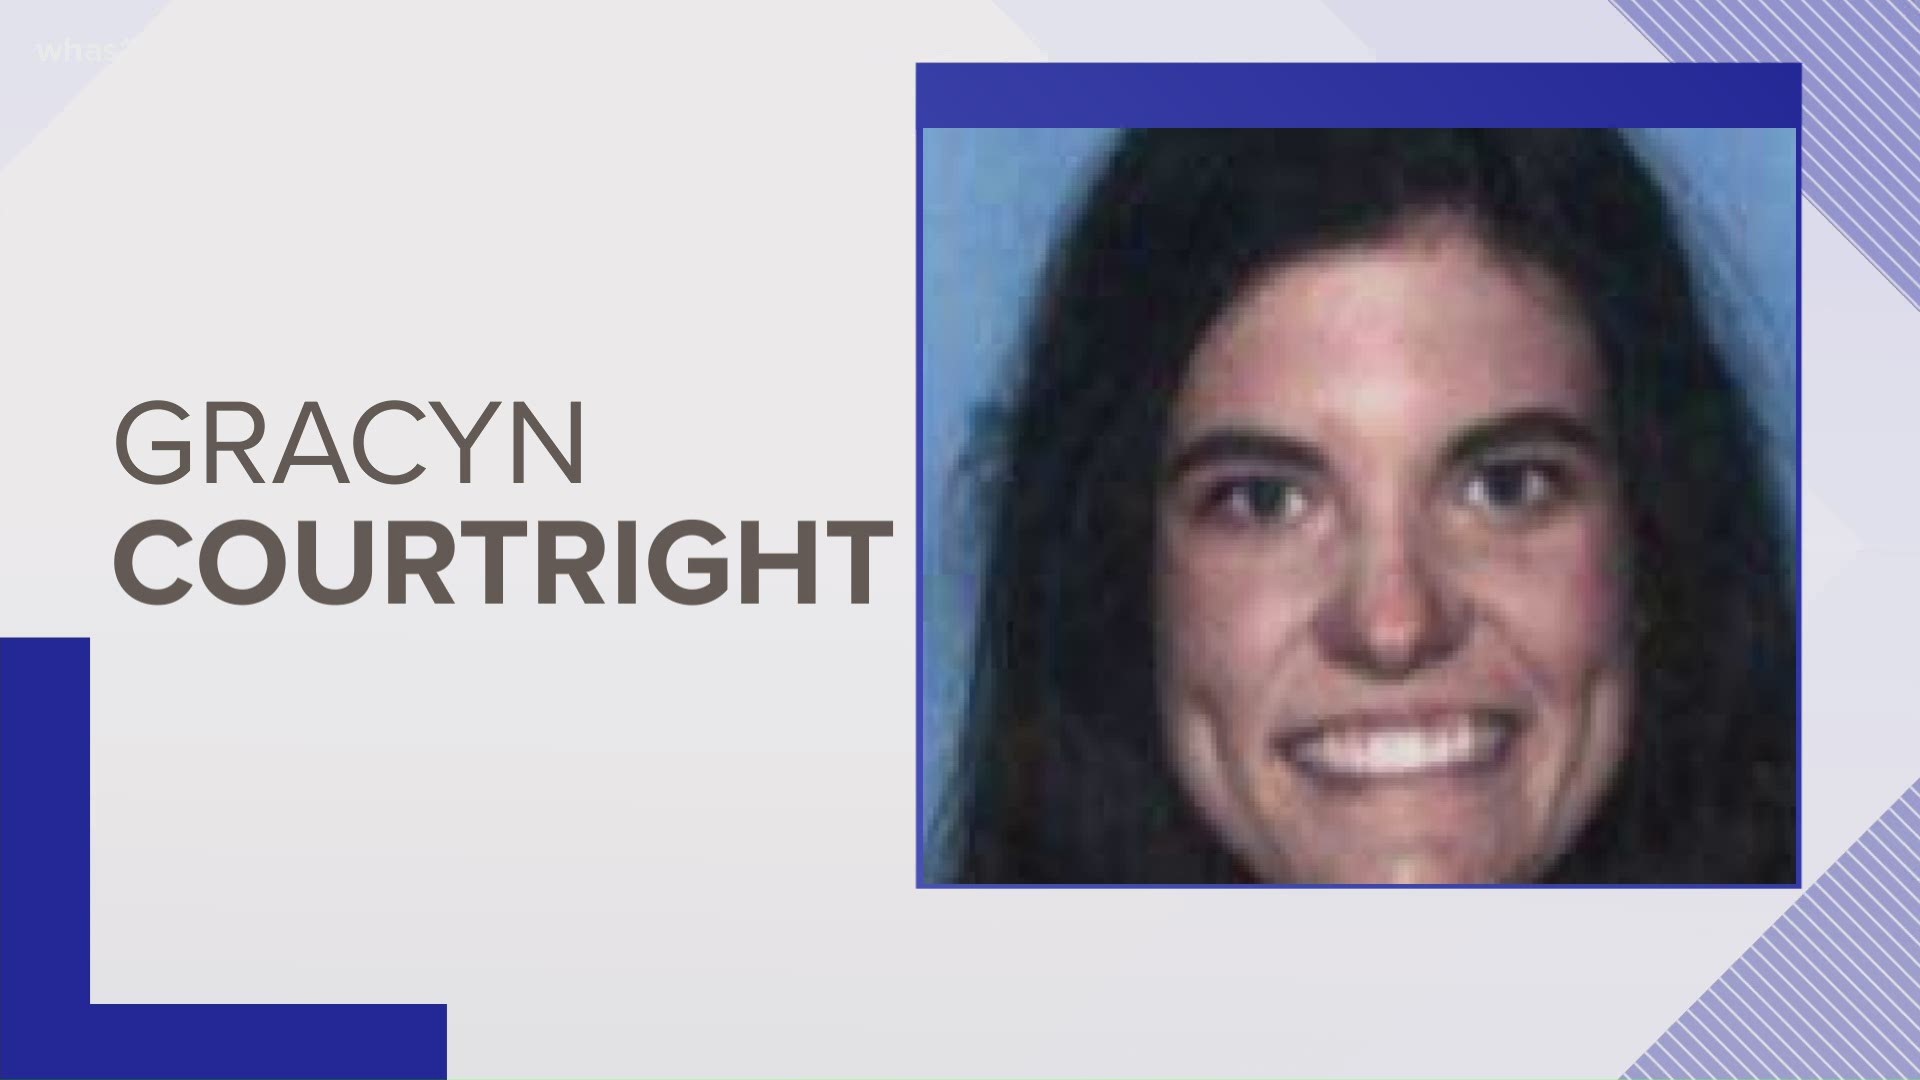 Gracyn Courtright is facing charges after entering the Capitol illegally during the insurrection riots on Jan. 6.